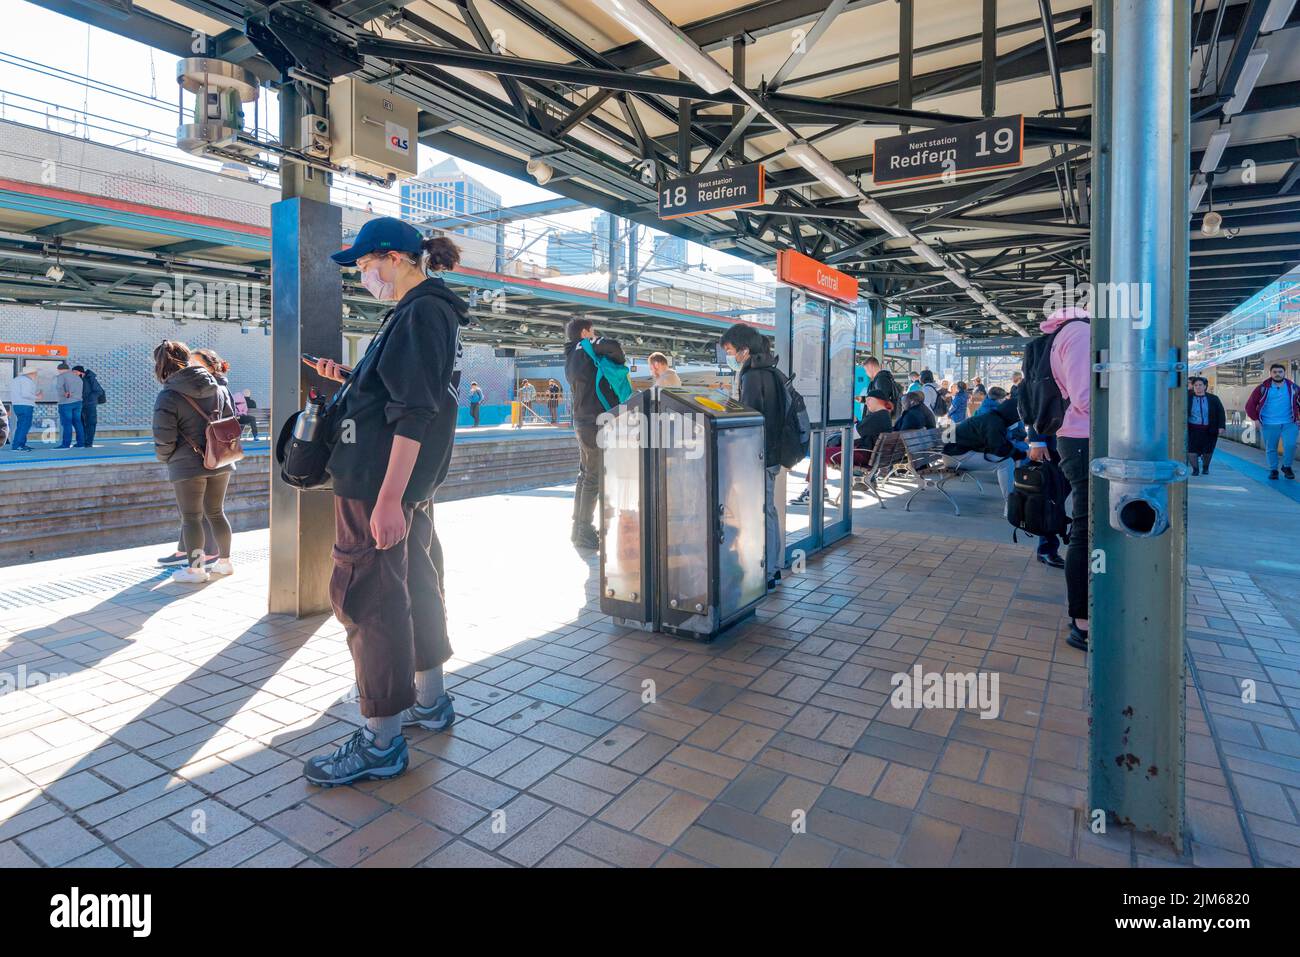 June 2022: People waiting, some wearing masks, during the day on platforms 18 and 19 at Central Station in Sydney, New South Wales, Australia Stock Photo